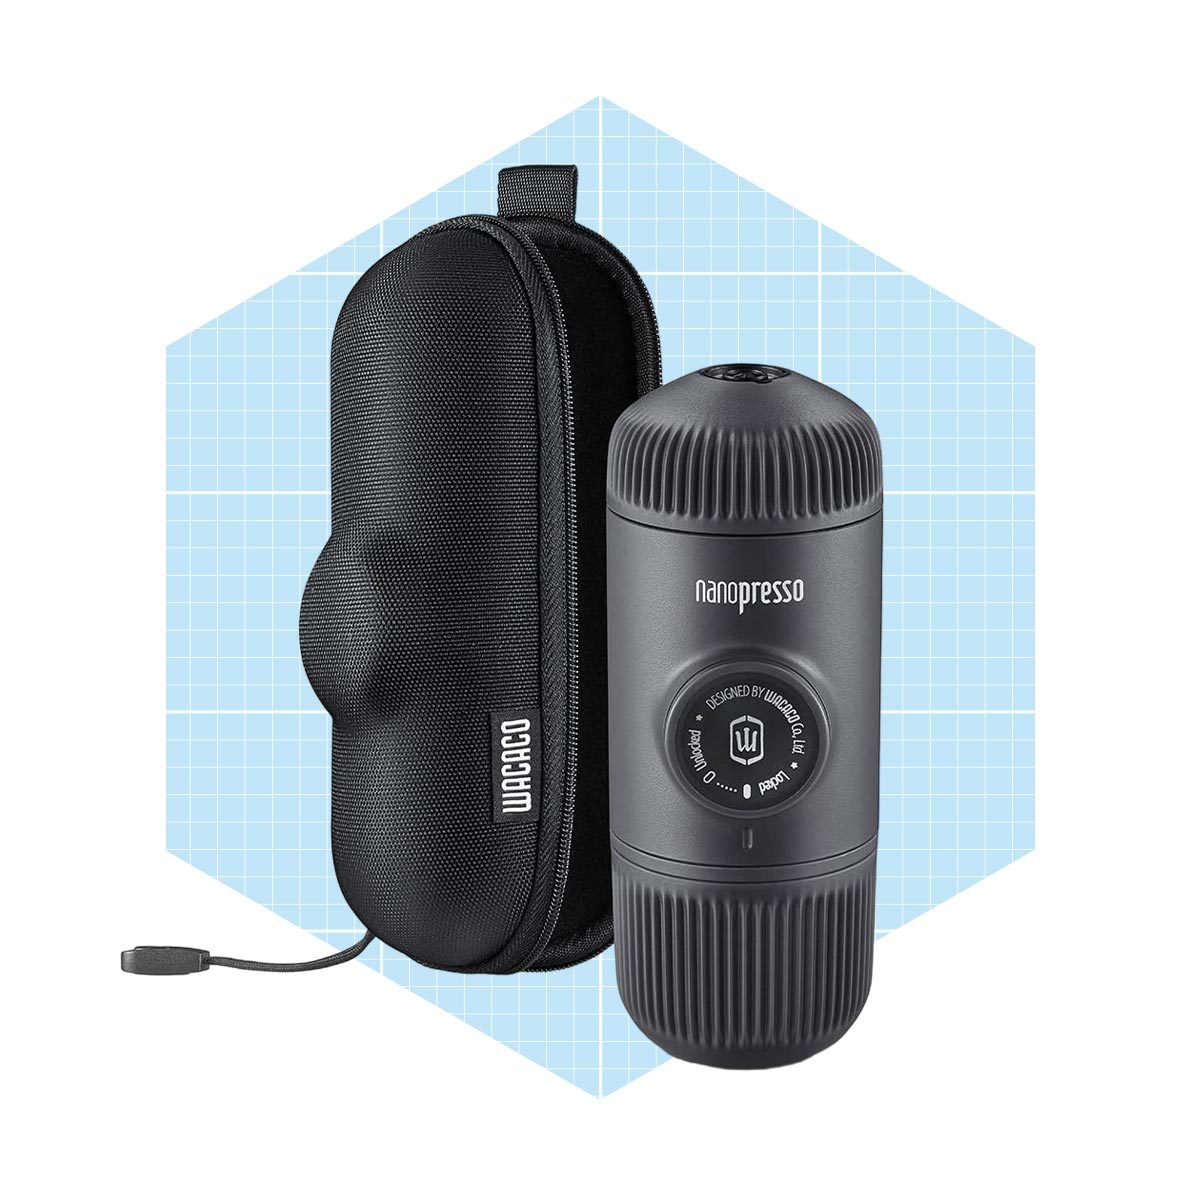 <h3 class="a-size-large a-spacing-none"><span>Wacaco Nanopresso Portable Espresso Maker</span></h3> <p><span>Anyone with access to hot water can make an espresso on the go with the </span><span><a href="https://www.amazon.com/Nanopresso-Portable-Espresso-Protective-Minipresso/dp/B0752XV66X/" rel="noopener">Wacaco Nanopress</a>. </span><span>This compact single-serve espresso machine is about the size of a pint glass and fits perfectly in a backpack. Just add hot water to the grounds and pump it into your cup for a café-worthy brew. Weighing in at just 11.8 ounces with its own carrying case, this tiny espresso machine can fit in your cargo pocket. </span><span>The Nanopresso comes in five color choices, and o</span><span>ver 1,800 five-star Amazon reviewers agree that g</span>ood things come in small packages. Consider it a unique <a href="https://www.familyhandyman.com/list/gifts-for-coffee-lovers/">gift for coffee lovers</a> that they can use just about anywhere.</p> <p><strong>Pros</strong></p> <ul> <li><span>Has a water tank capacity of 2.7 ounces</span></li> <li><span>Weighs just 11.8 ounces and is 6.14 inches long</span></li> <li>Comes with a case</li> <li>Available in five colors</li> </ul> <p><strong>Cons</strong></p> <ul> <li>Doesn't include a mug</li> <li>On the pricier side</li> </ul> <p class="listicle-page__cta-button-shop"><a class="shop-btn" href="https://www.amazon.com/Nanopresso-Portable-Espresso-Protective-Minipresso/dp/B0752XV66X/">Shop Now</a></p>